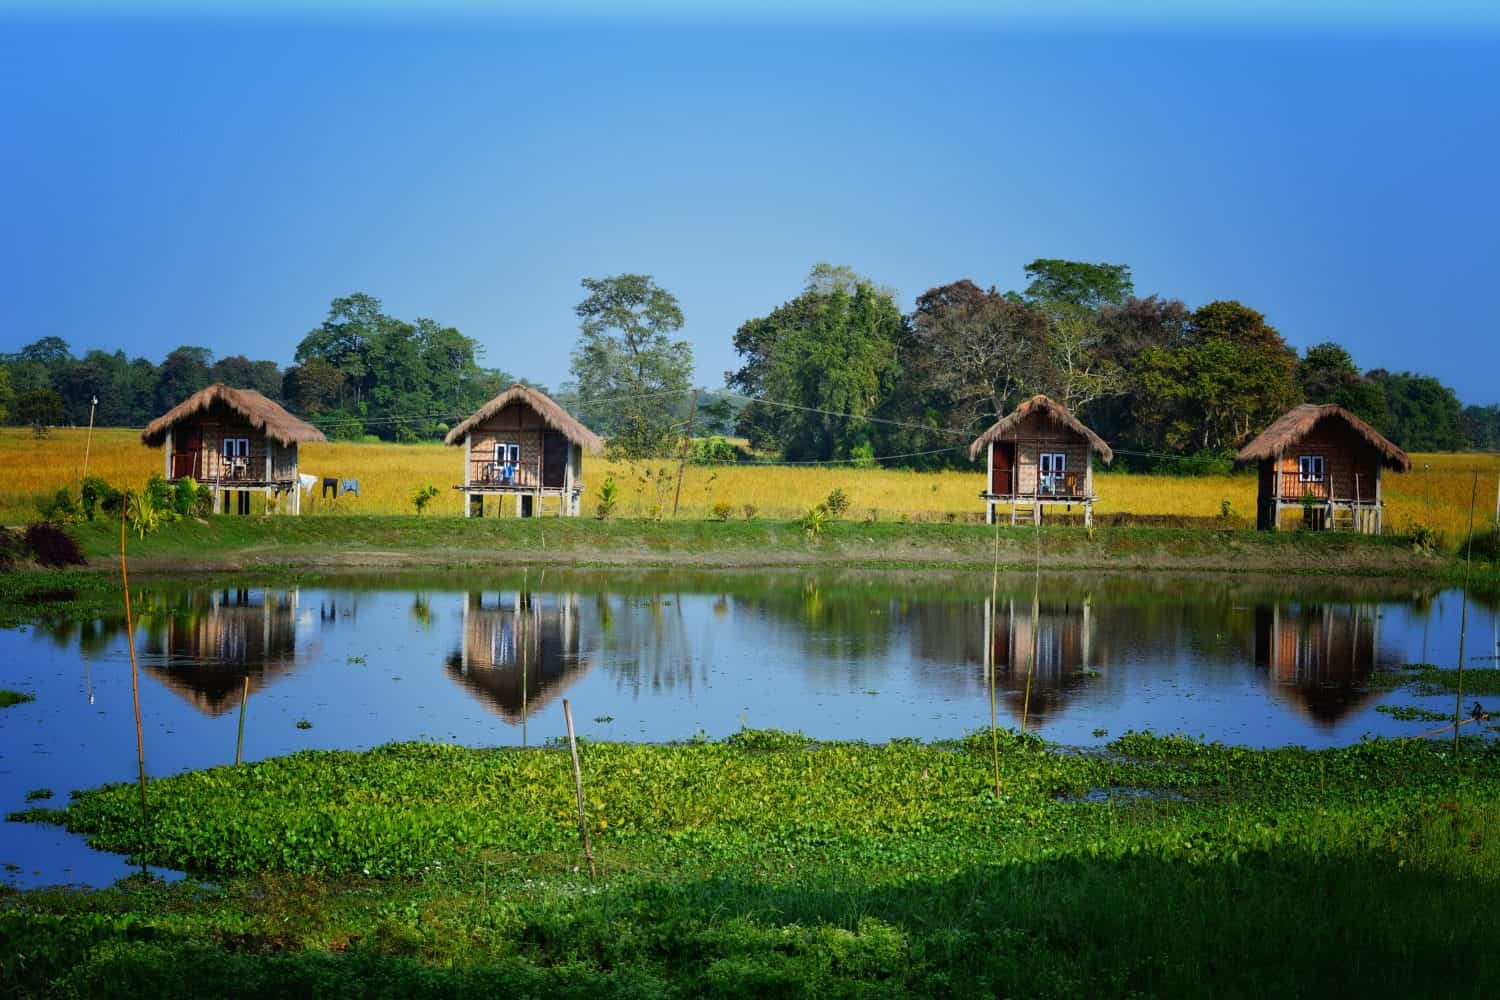 <ul> <li><strong>Location:</strong> India</li> <li><strong>Known For:</strong> Being the largest river island in the world</li> </ul> <p>Majuli Island is located in Assam, India, and holds the Guinness World Record for being the largest river island in the world. However, flooding and erosion are impacting the island. To put things in perspective, in the 19th century, Majuli Island measured around 500 square miles and is <a href="https://whc.unesco.org/en/tentativelists/1870/">now around 136 square miles</a>. Between flooding, erosion, and the ever-changing effects of nature, many experts fear that the island will be submerged entirely sooner rather than later.</p>